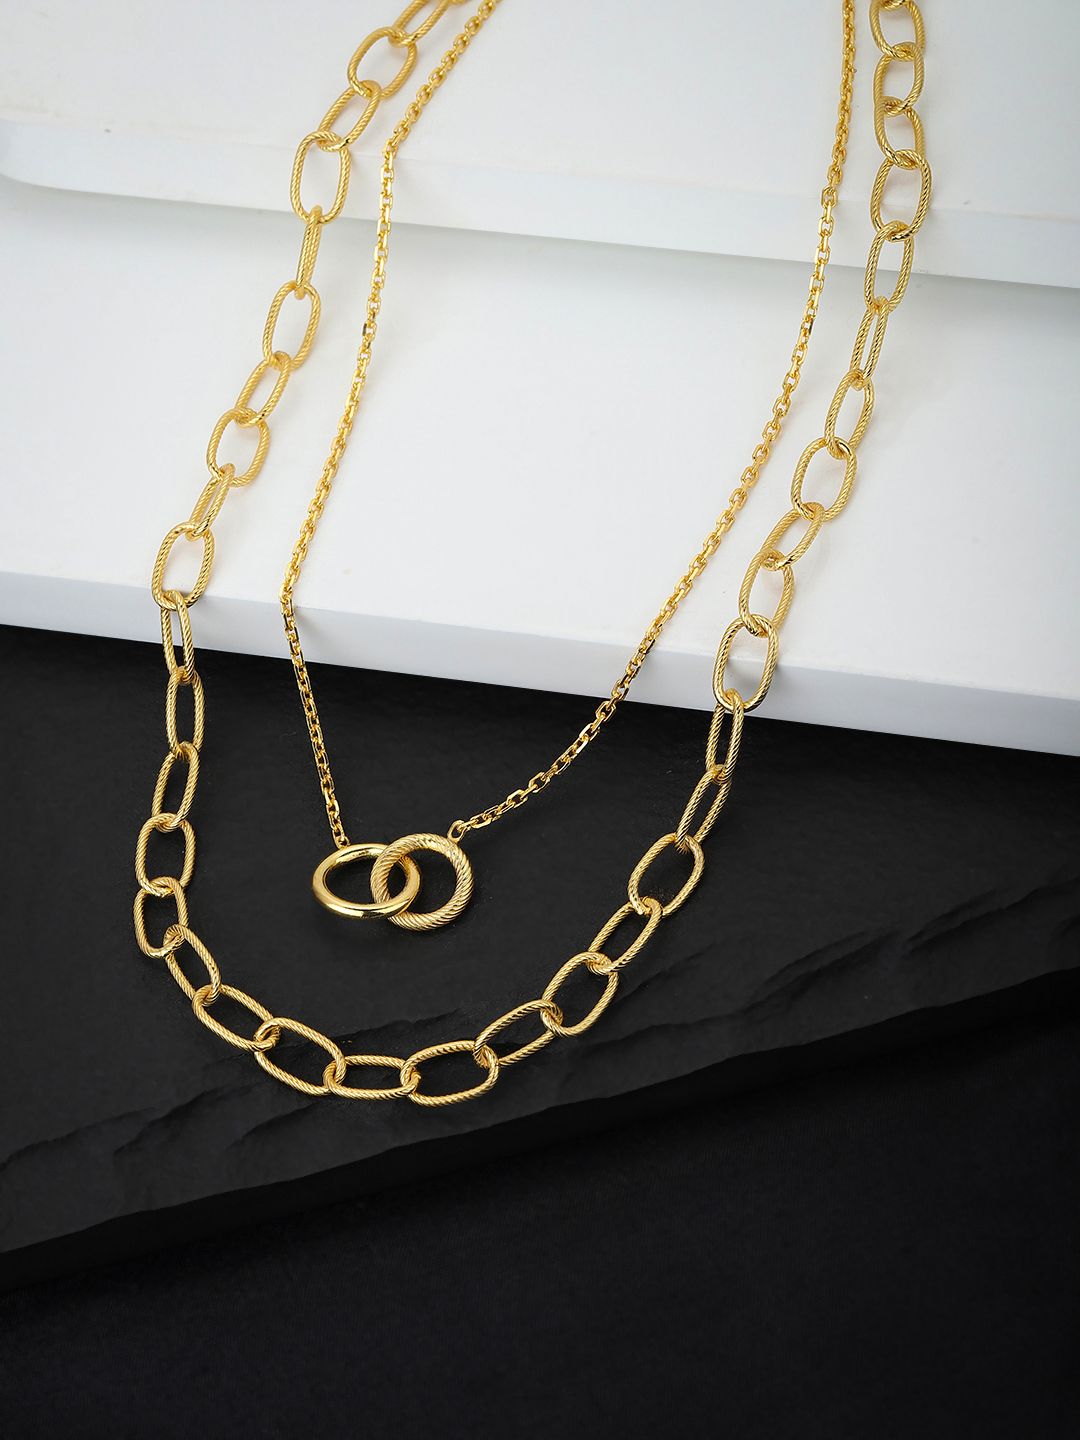 Carlton London Gold-Toned Brass Gold-Plated Layered Necklace Price in India